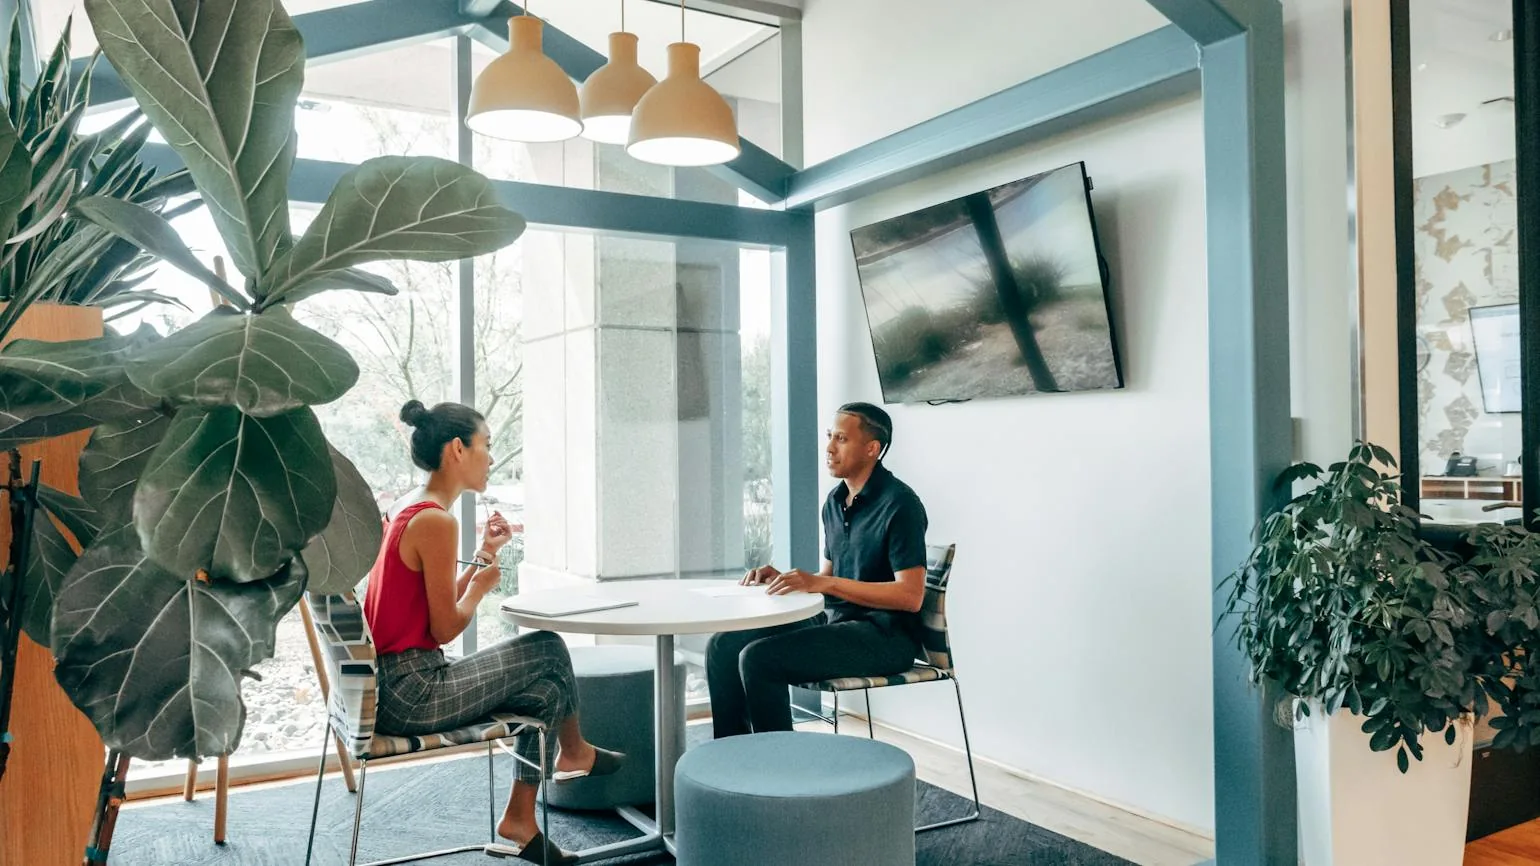 Types of coworking spaces for creatives